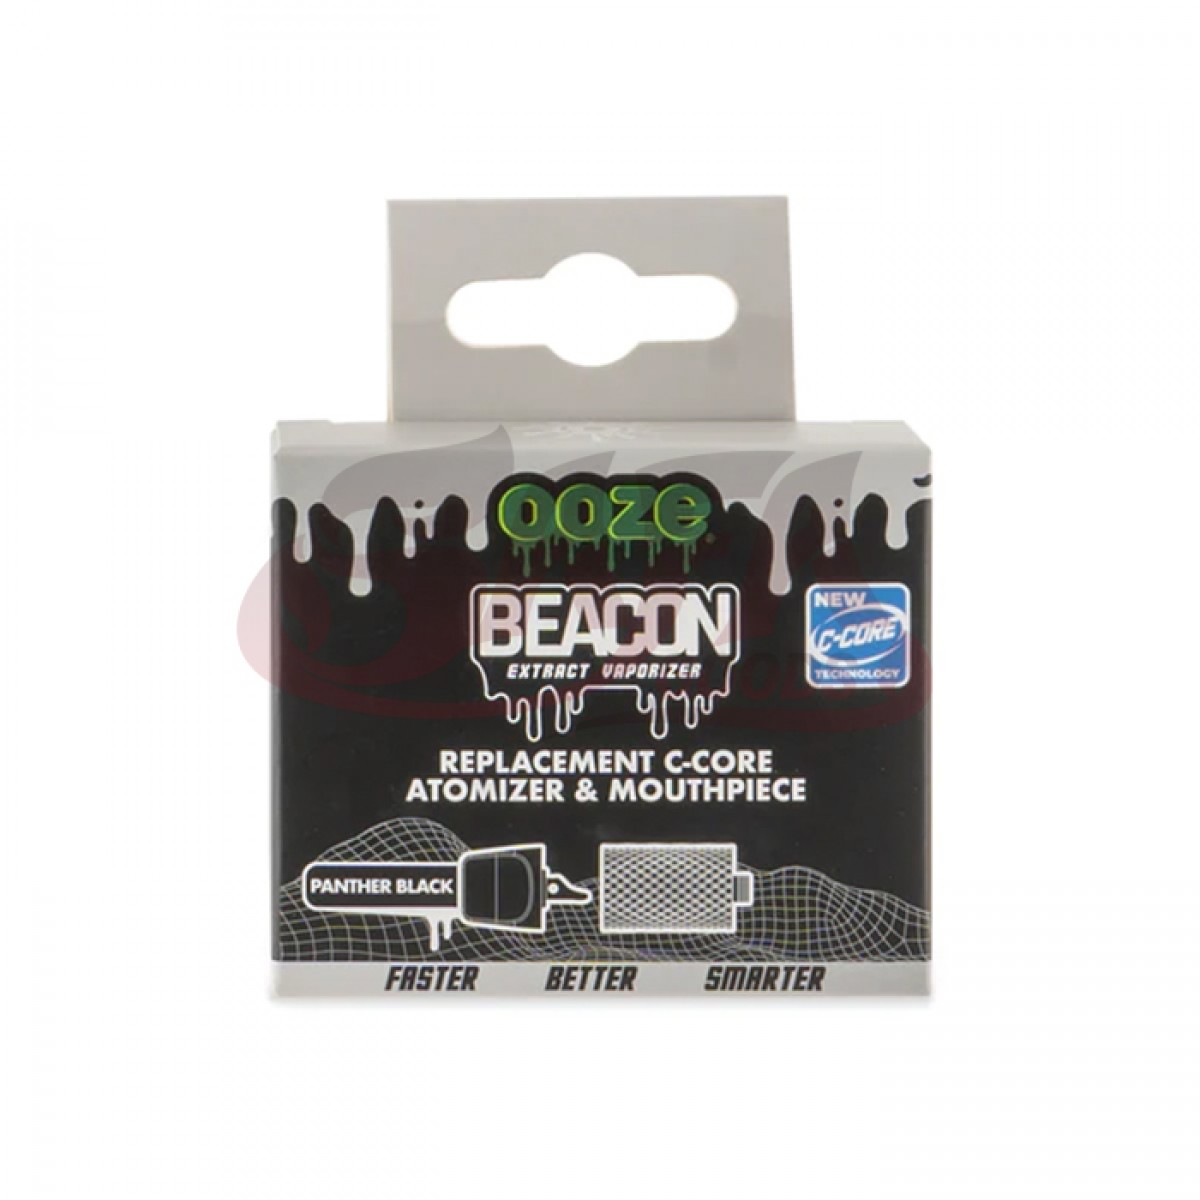 Ooze - Beacon - Replacement Atomizer Coil